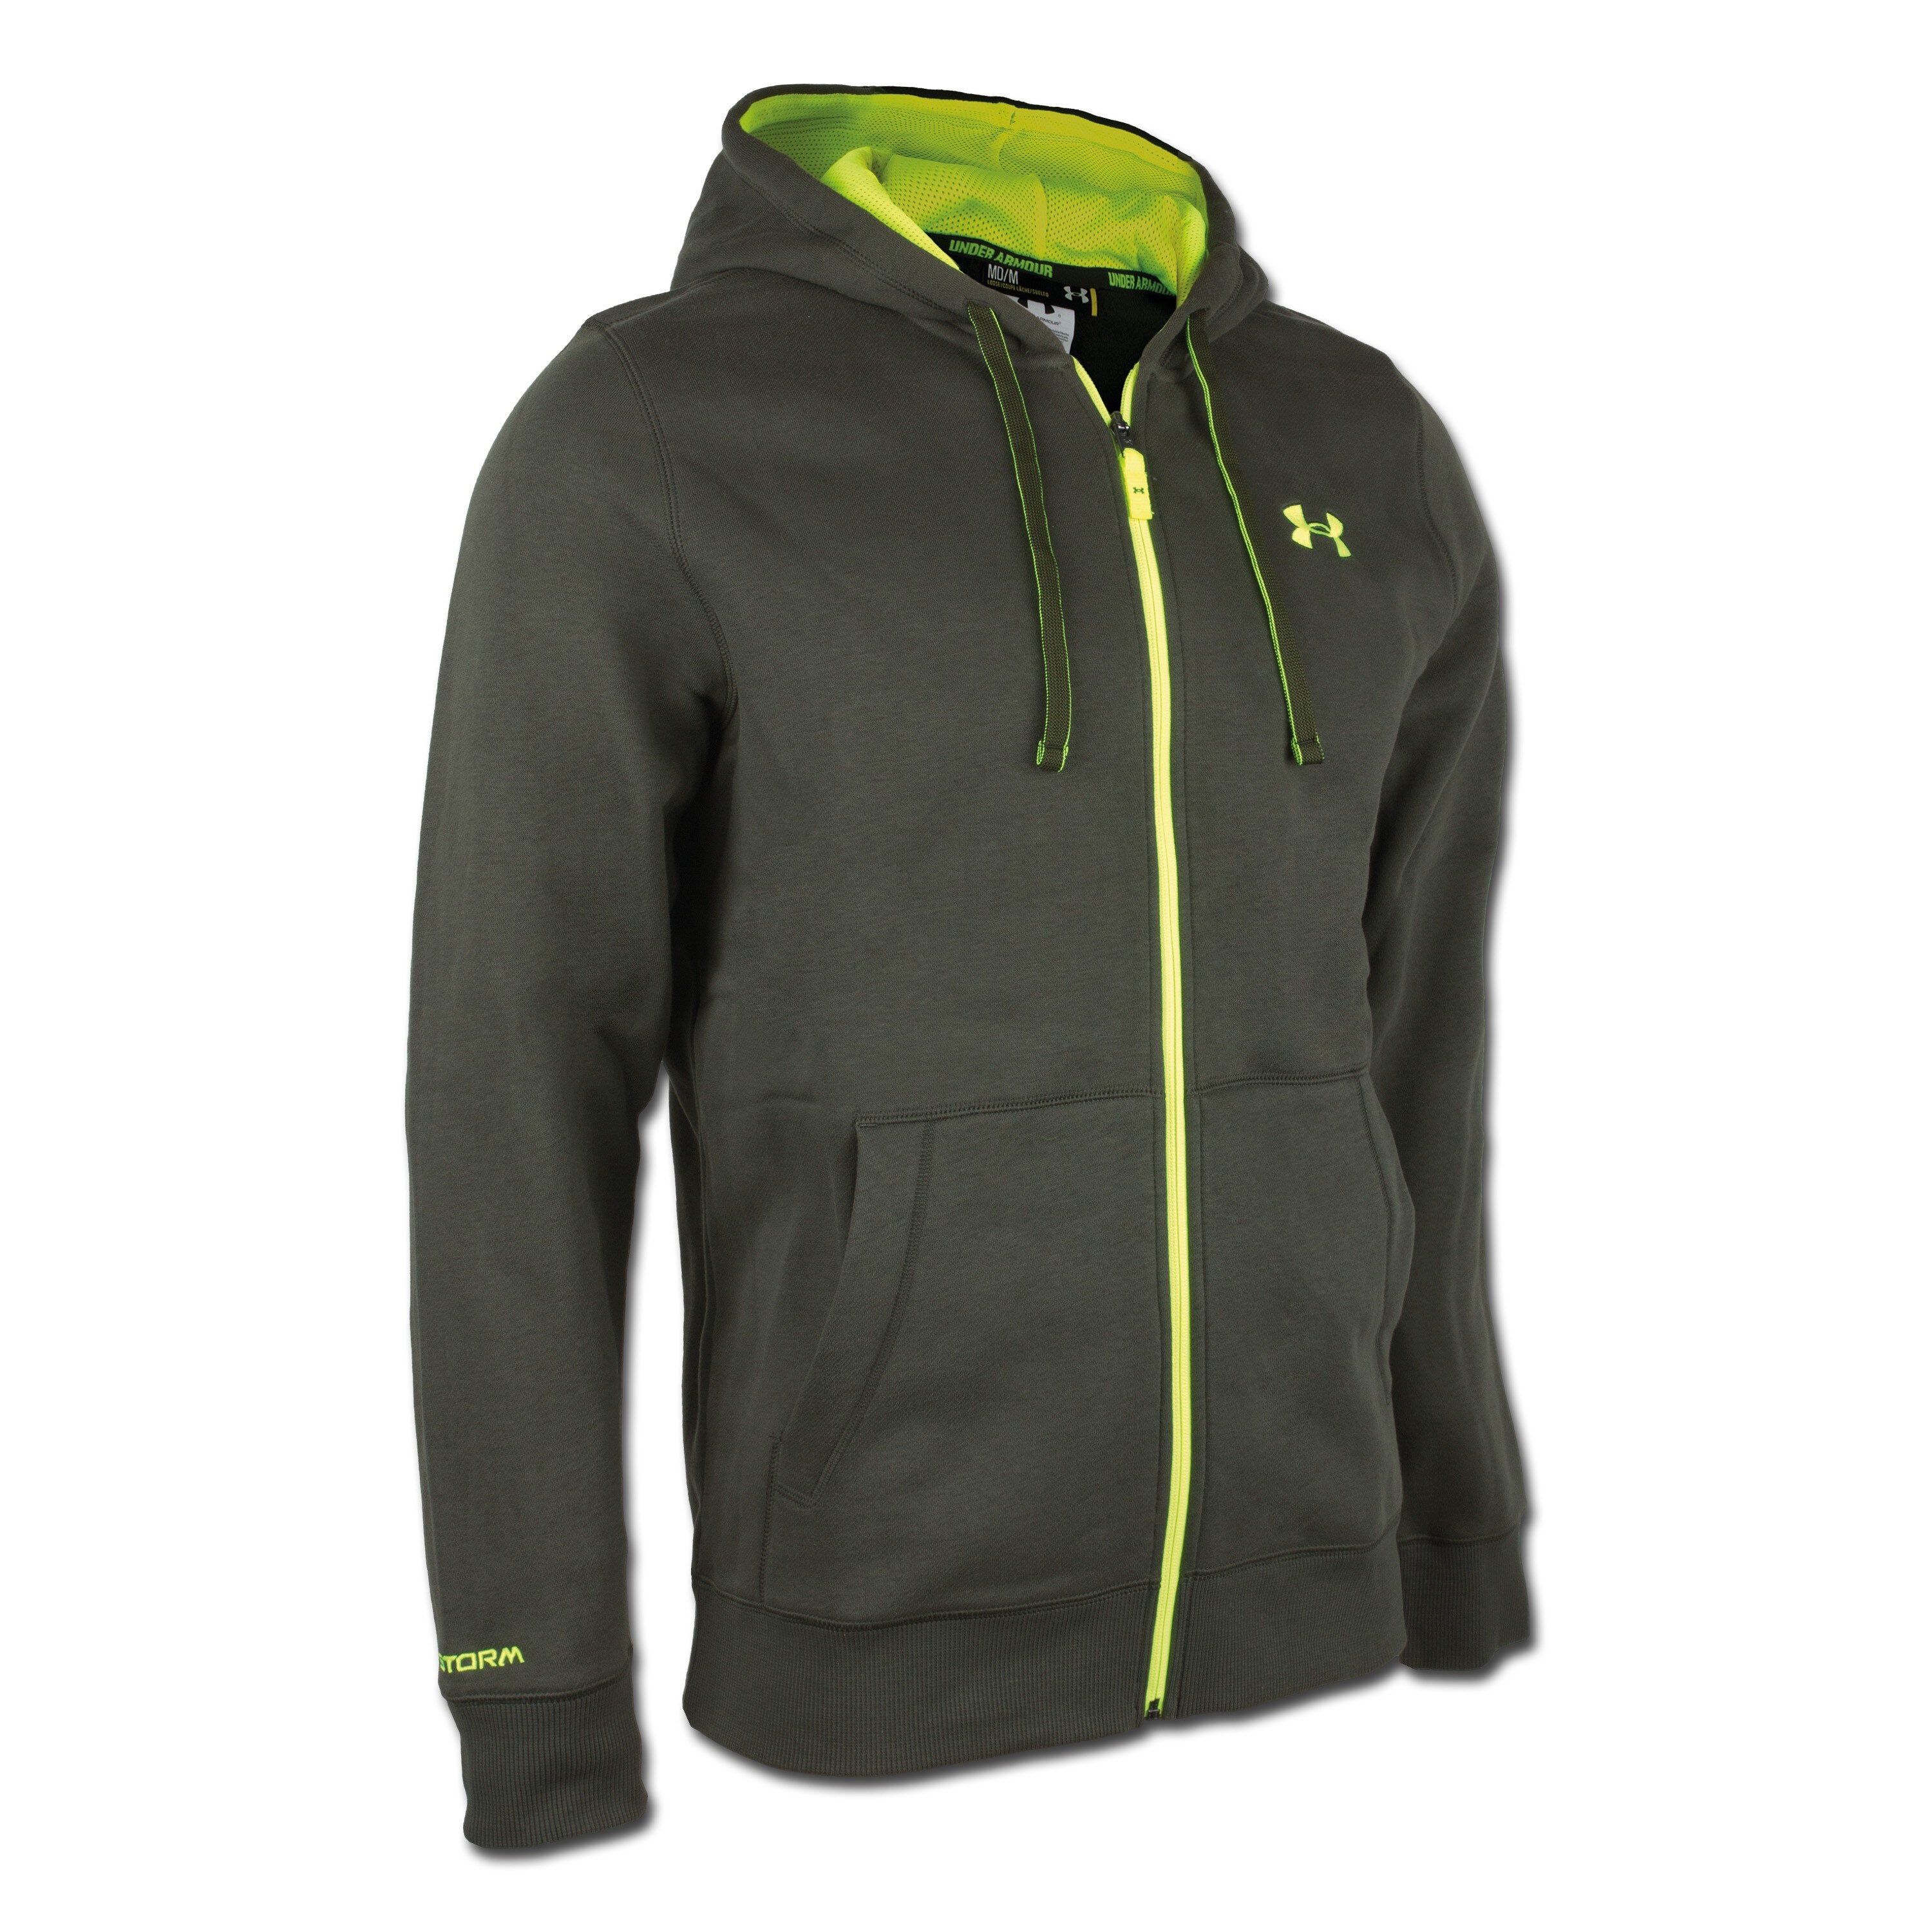 Under Armour Hoody Storm Cotton Rival green/yellow | Under Armour Hoody ...